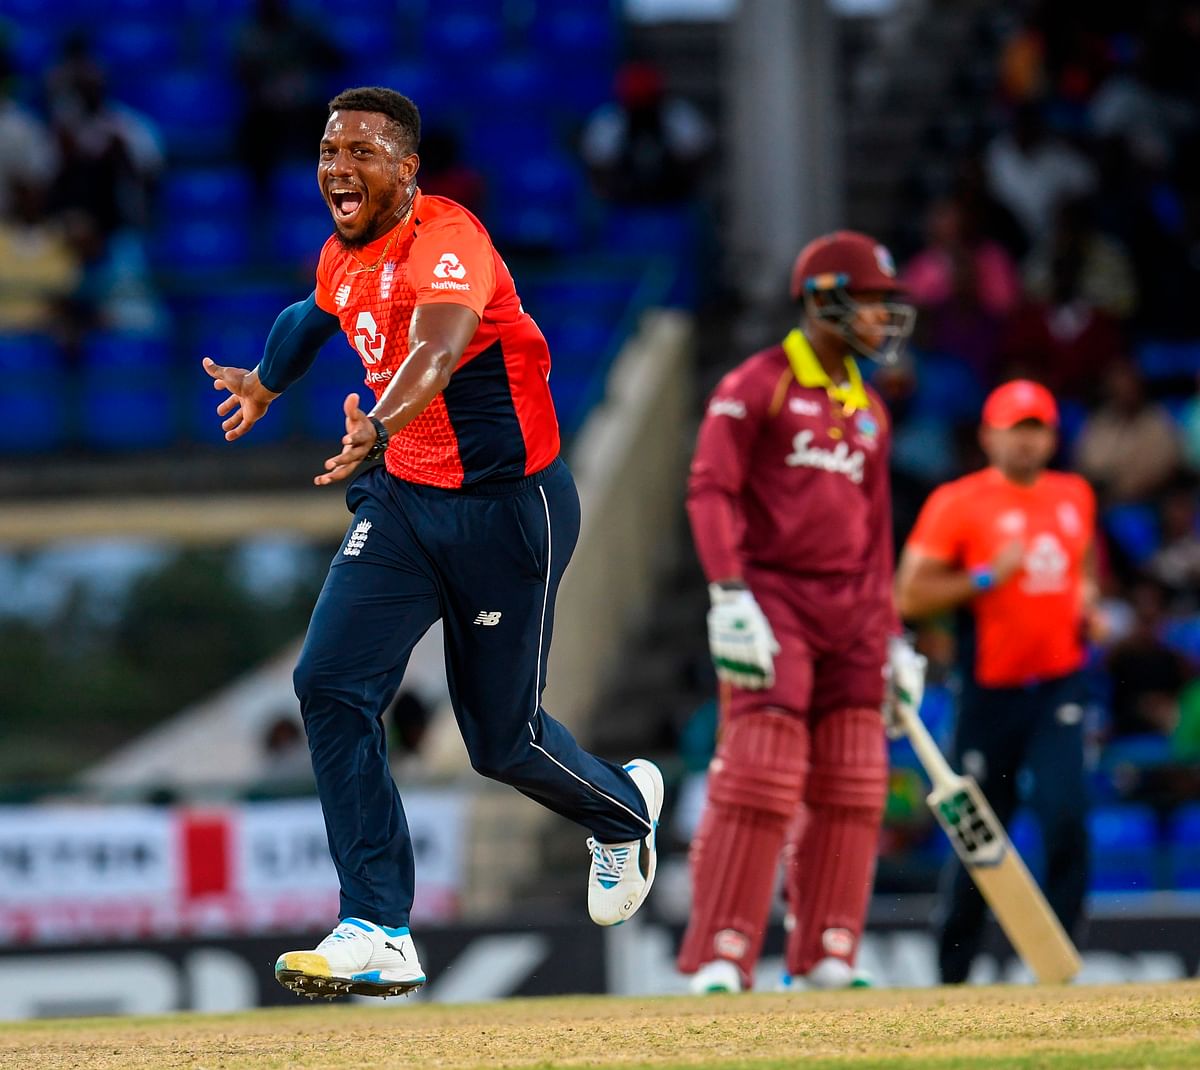 Chris Jordan of England celebrates the dismissal of Jason Holder of West Indies during the 2nd T20I between West Indies England at Warner Park, Basseterre, Saint Kitts and Nevis, on 8 March 2019. Photo: AFP